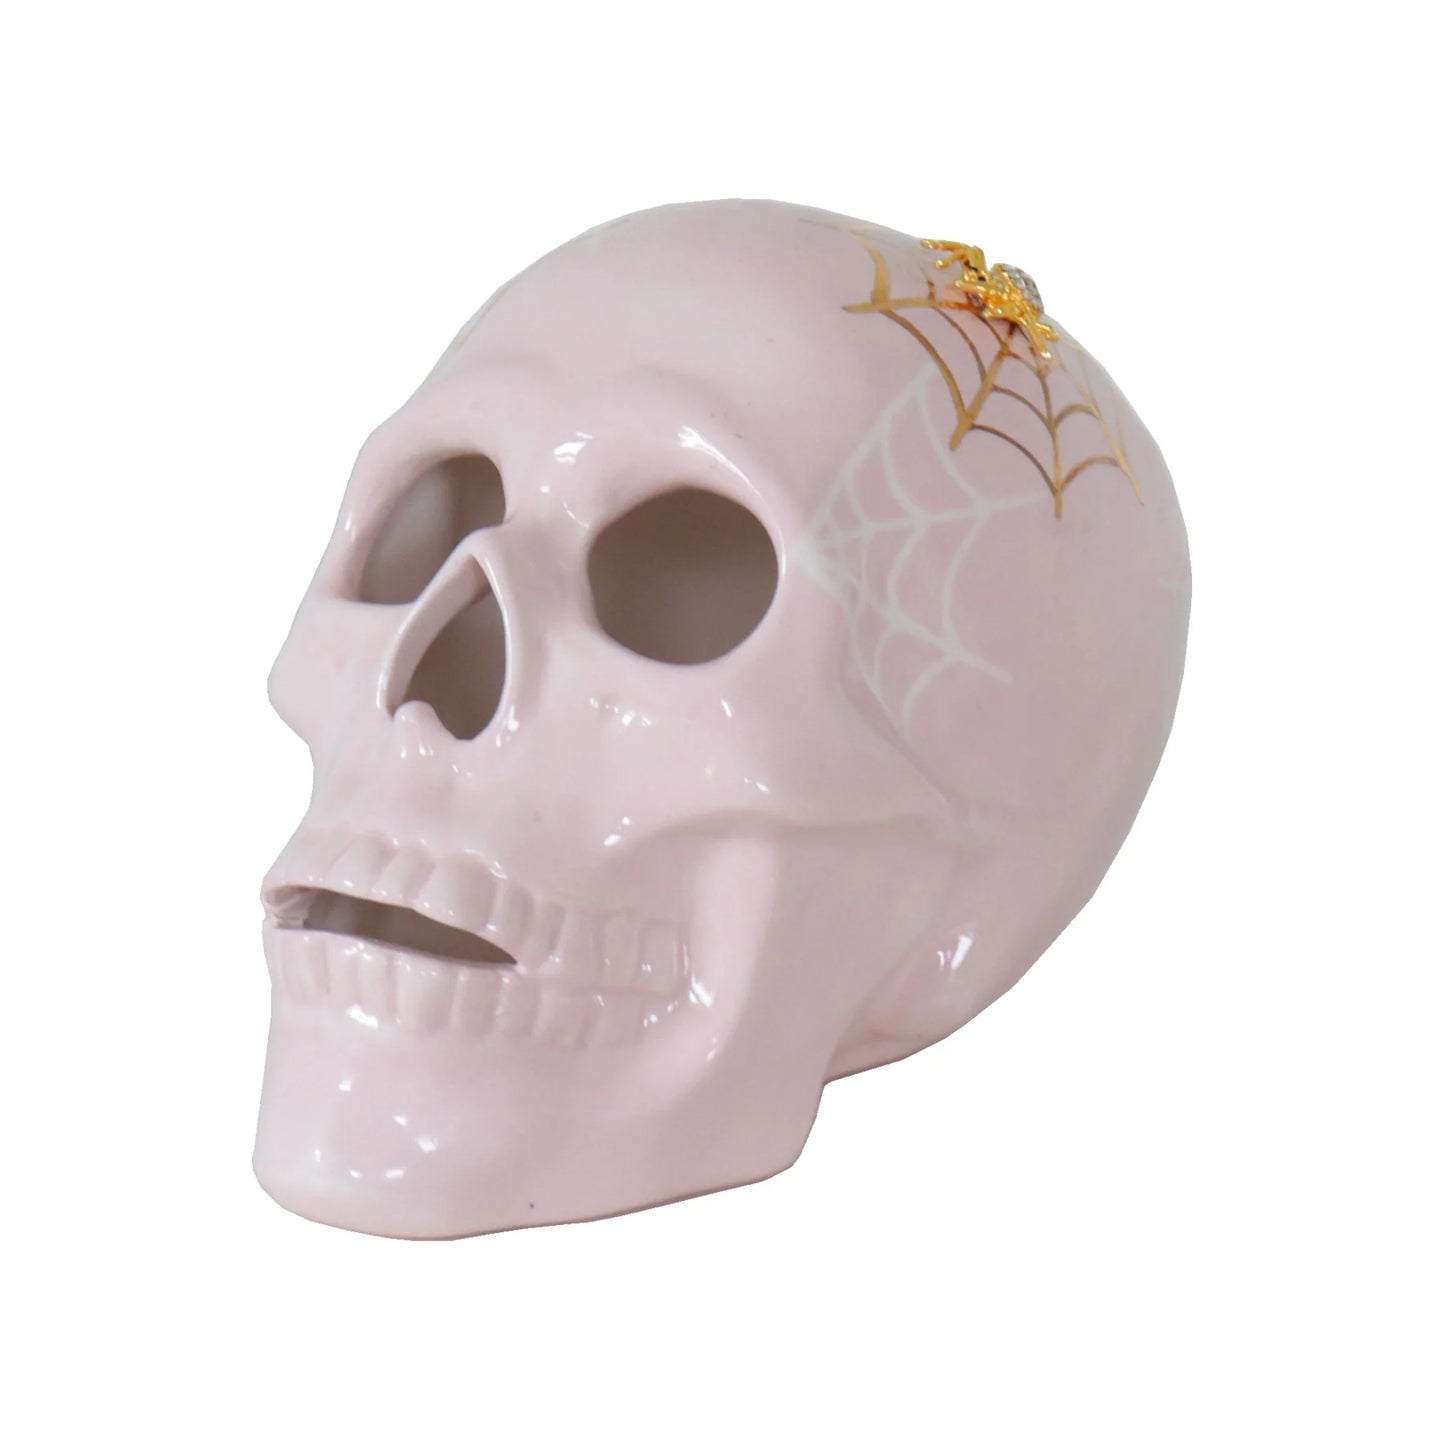 "Mr. Bones and Charlotte" Skull Decor with 22K Gold Accents- Pink